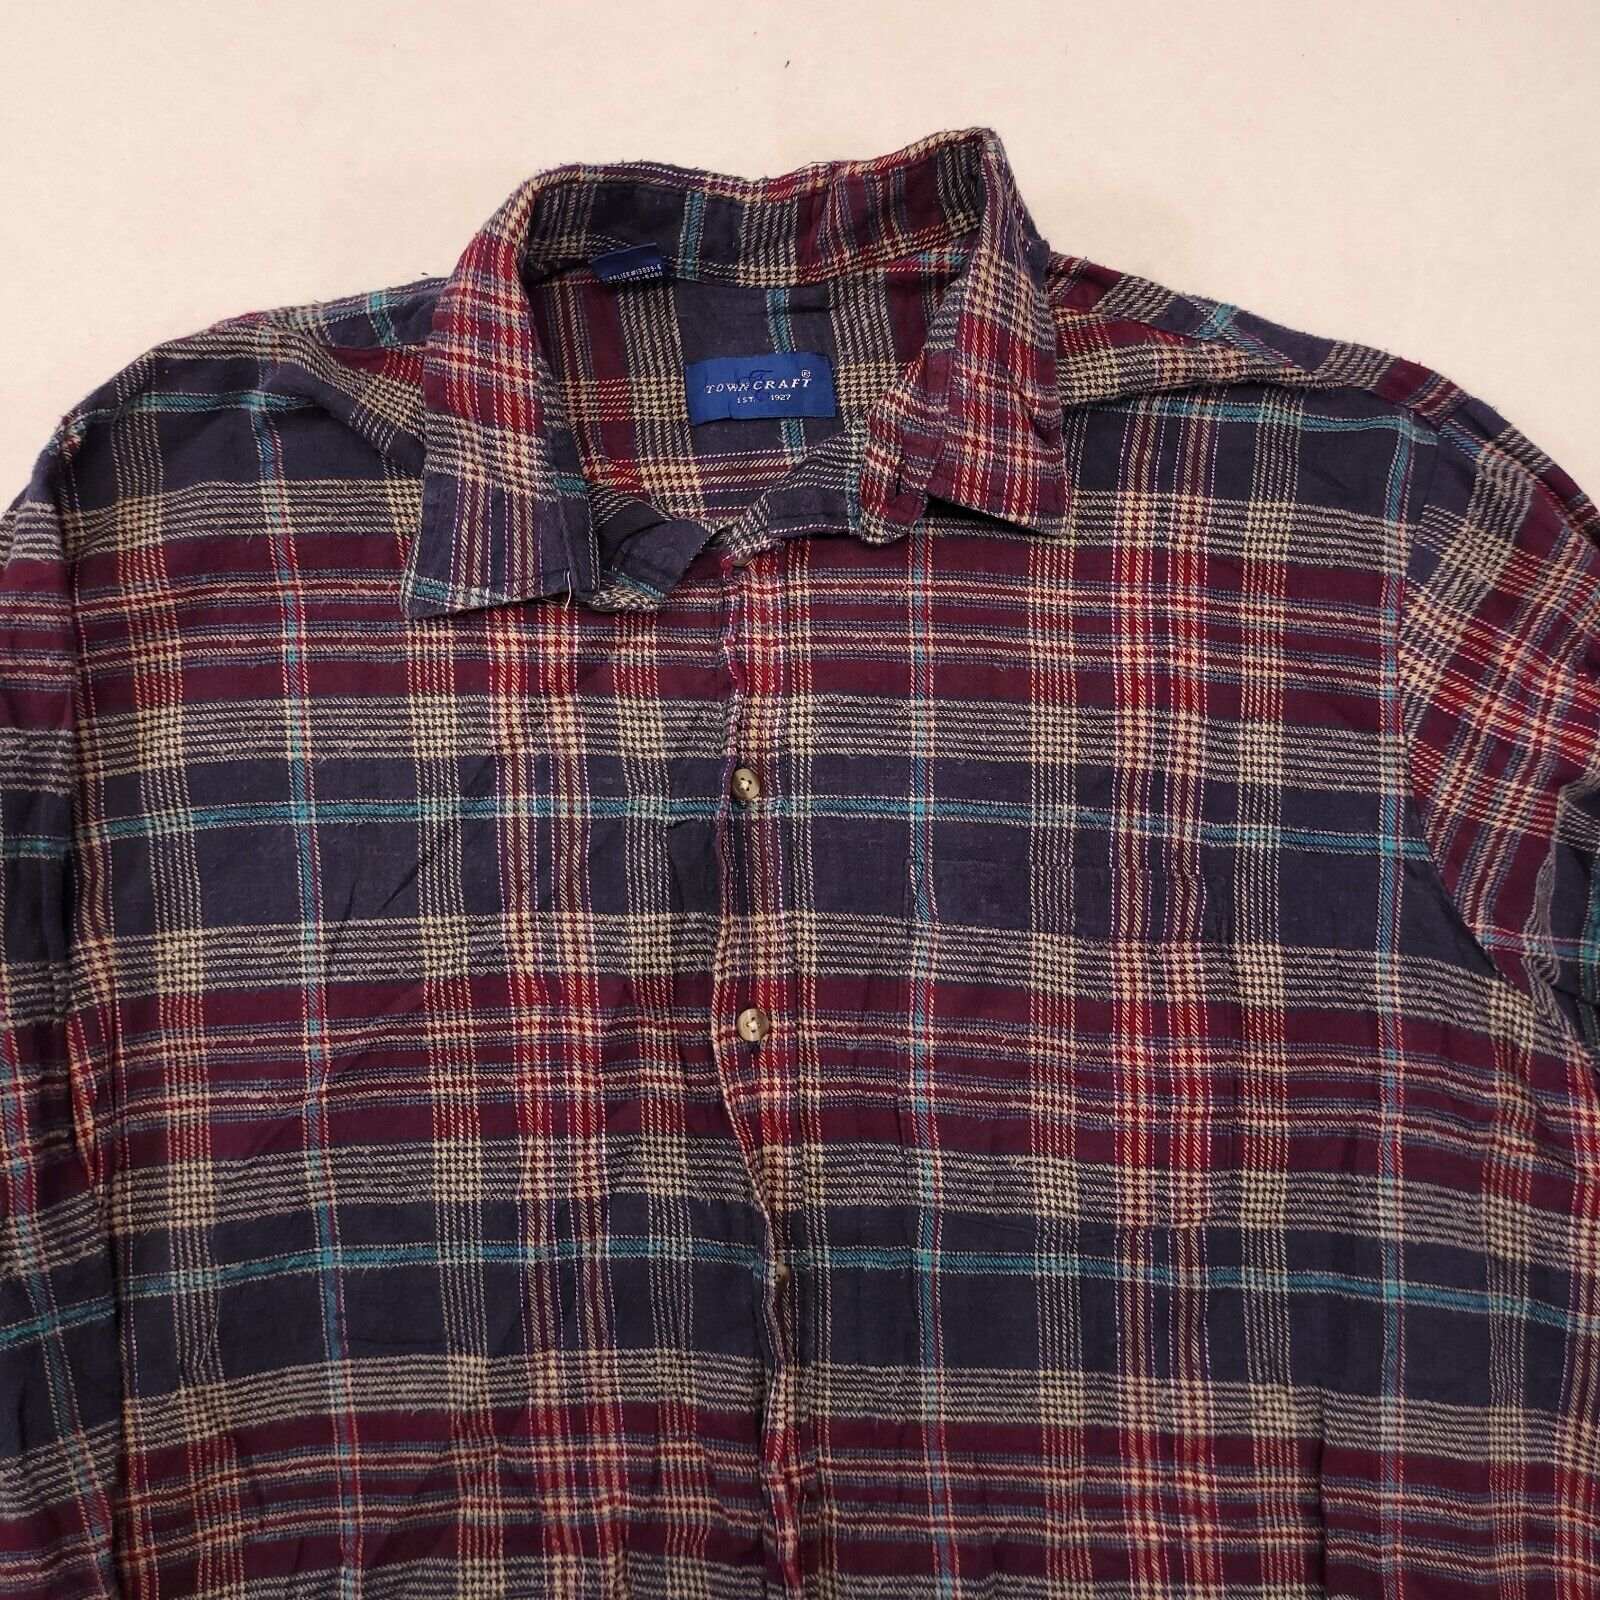 Town & Craft Madras Flannel Casual Button Up Shir… - image 1